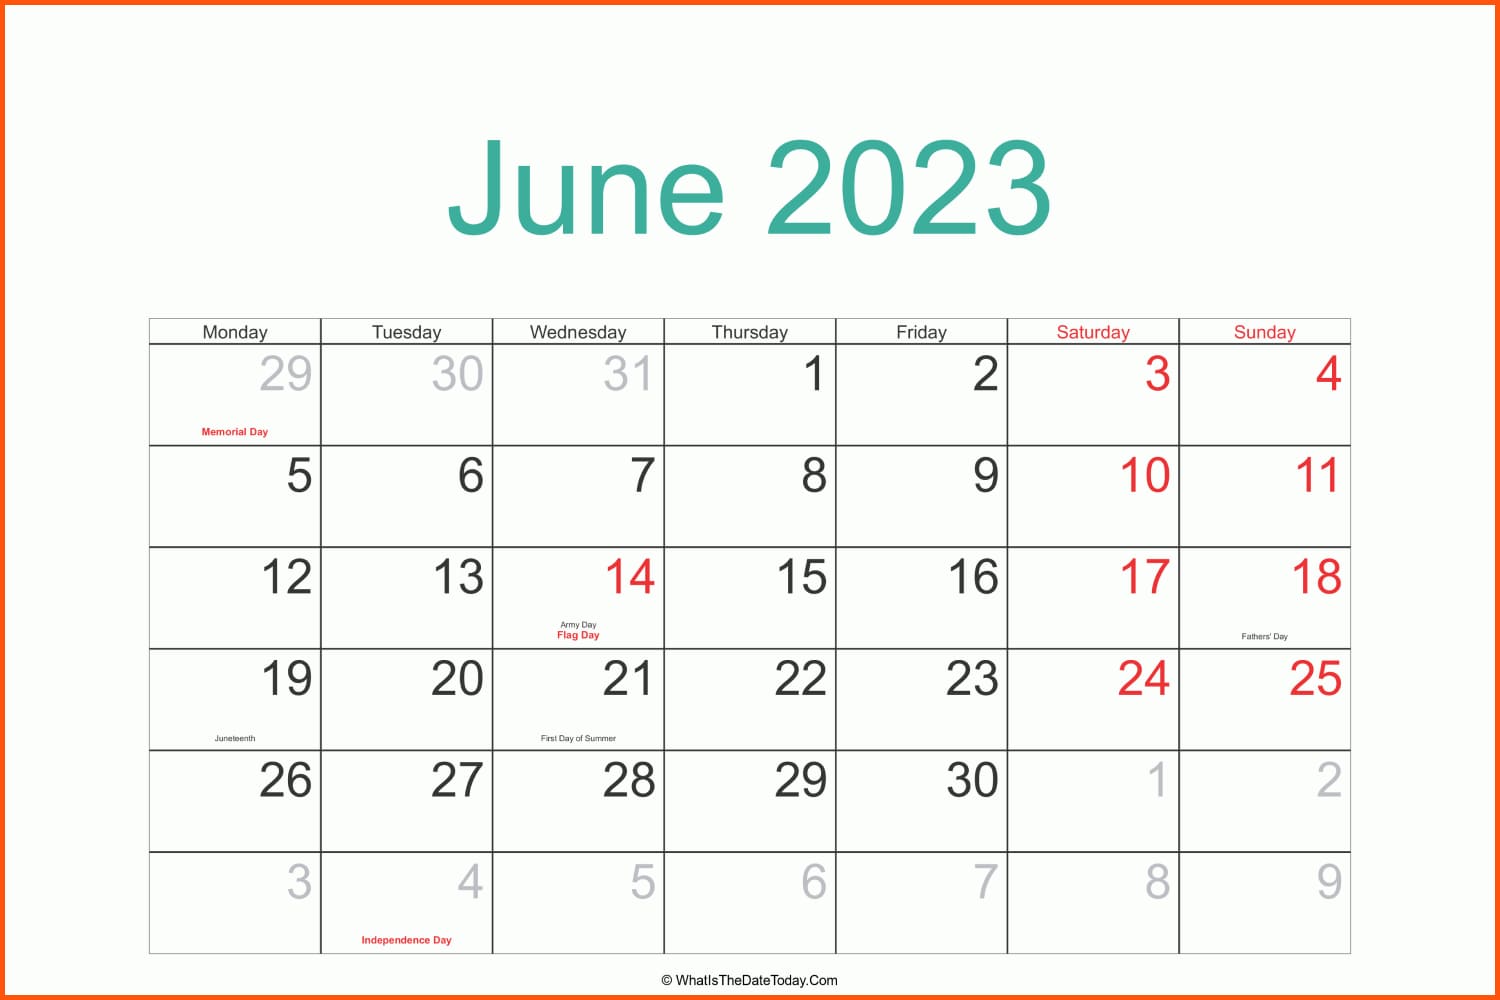 June calendar with holidays and major dates.